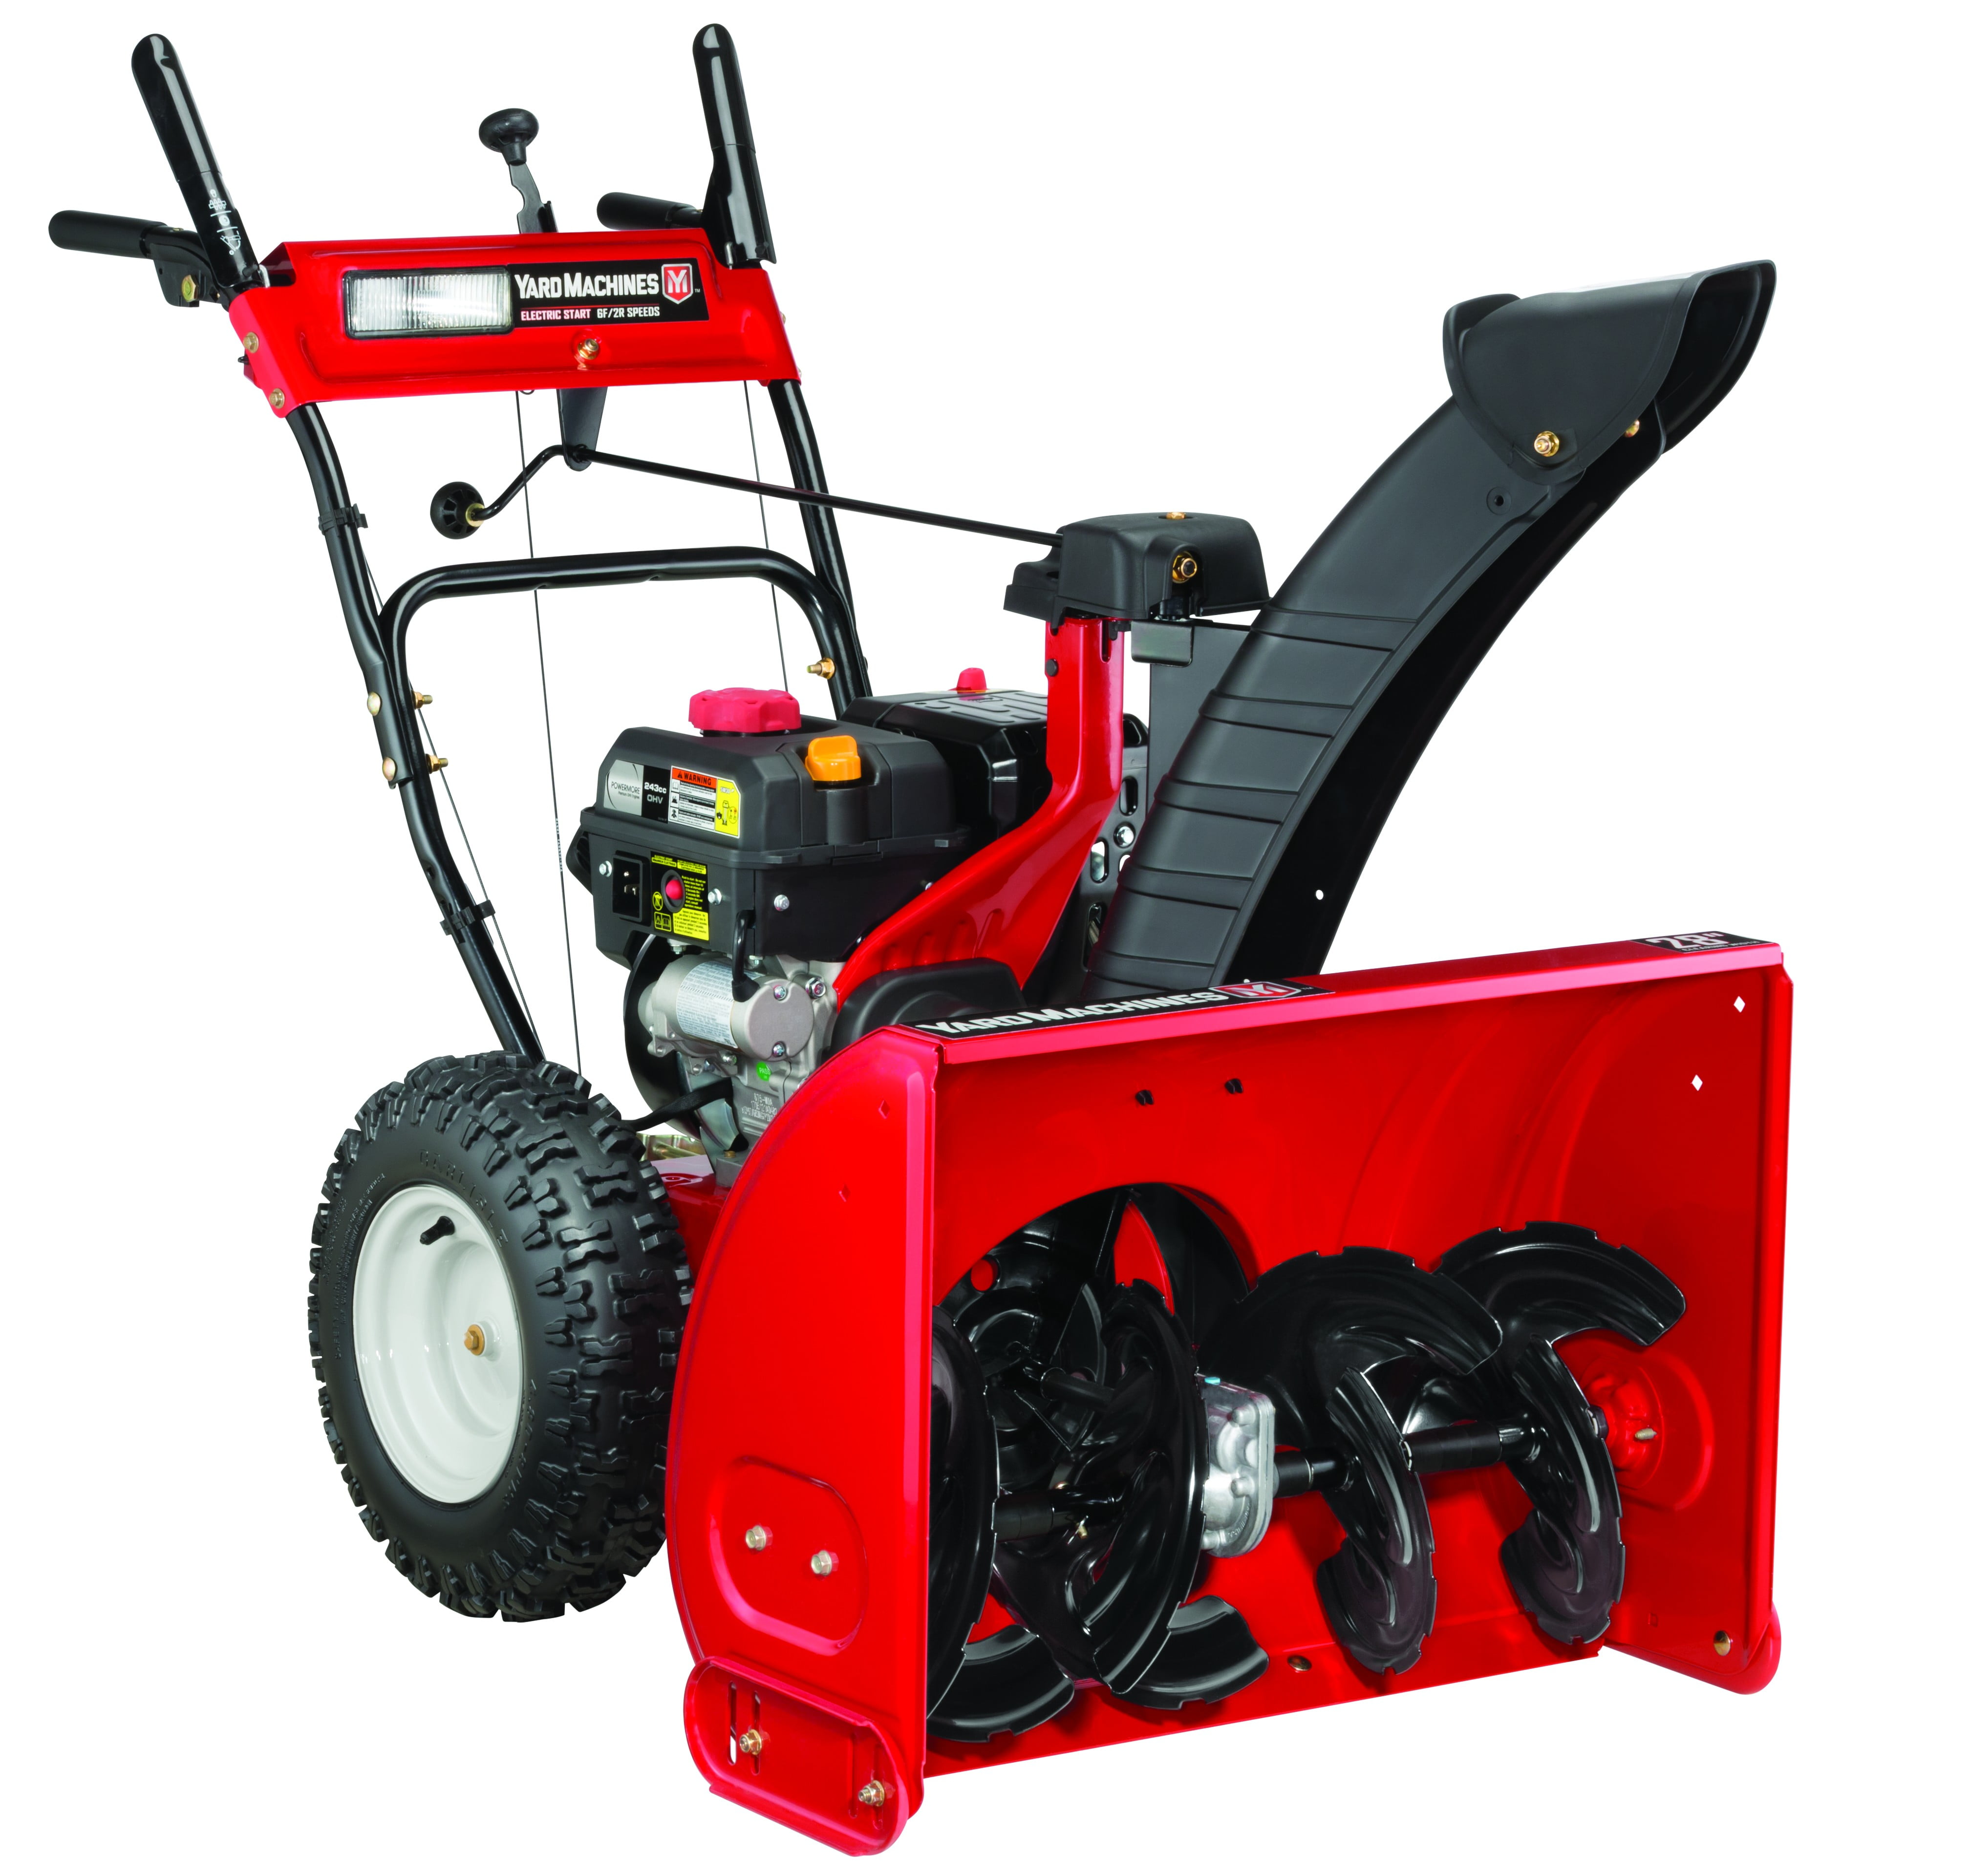 Yard Machines 28" 243cc Two-Stage Snow Blower with Electric Start